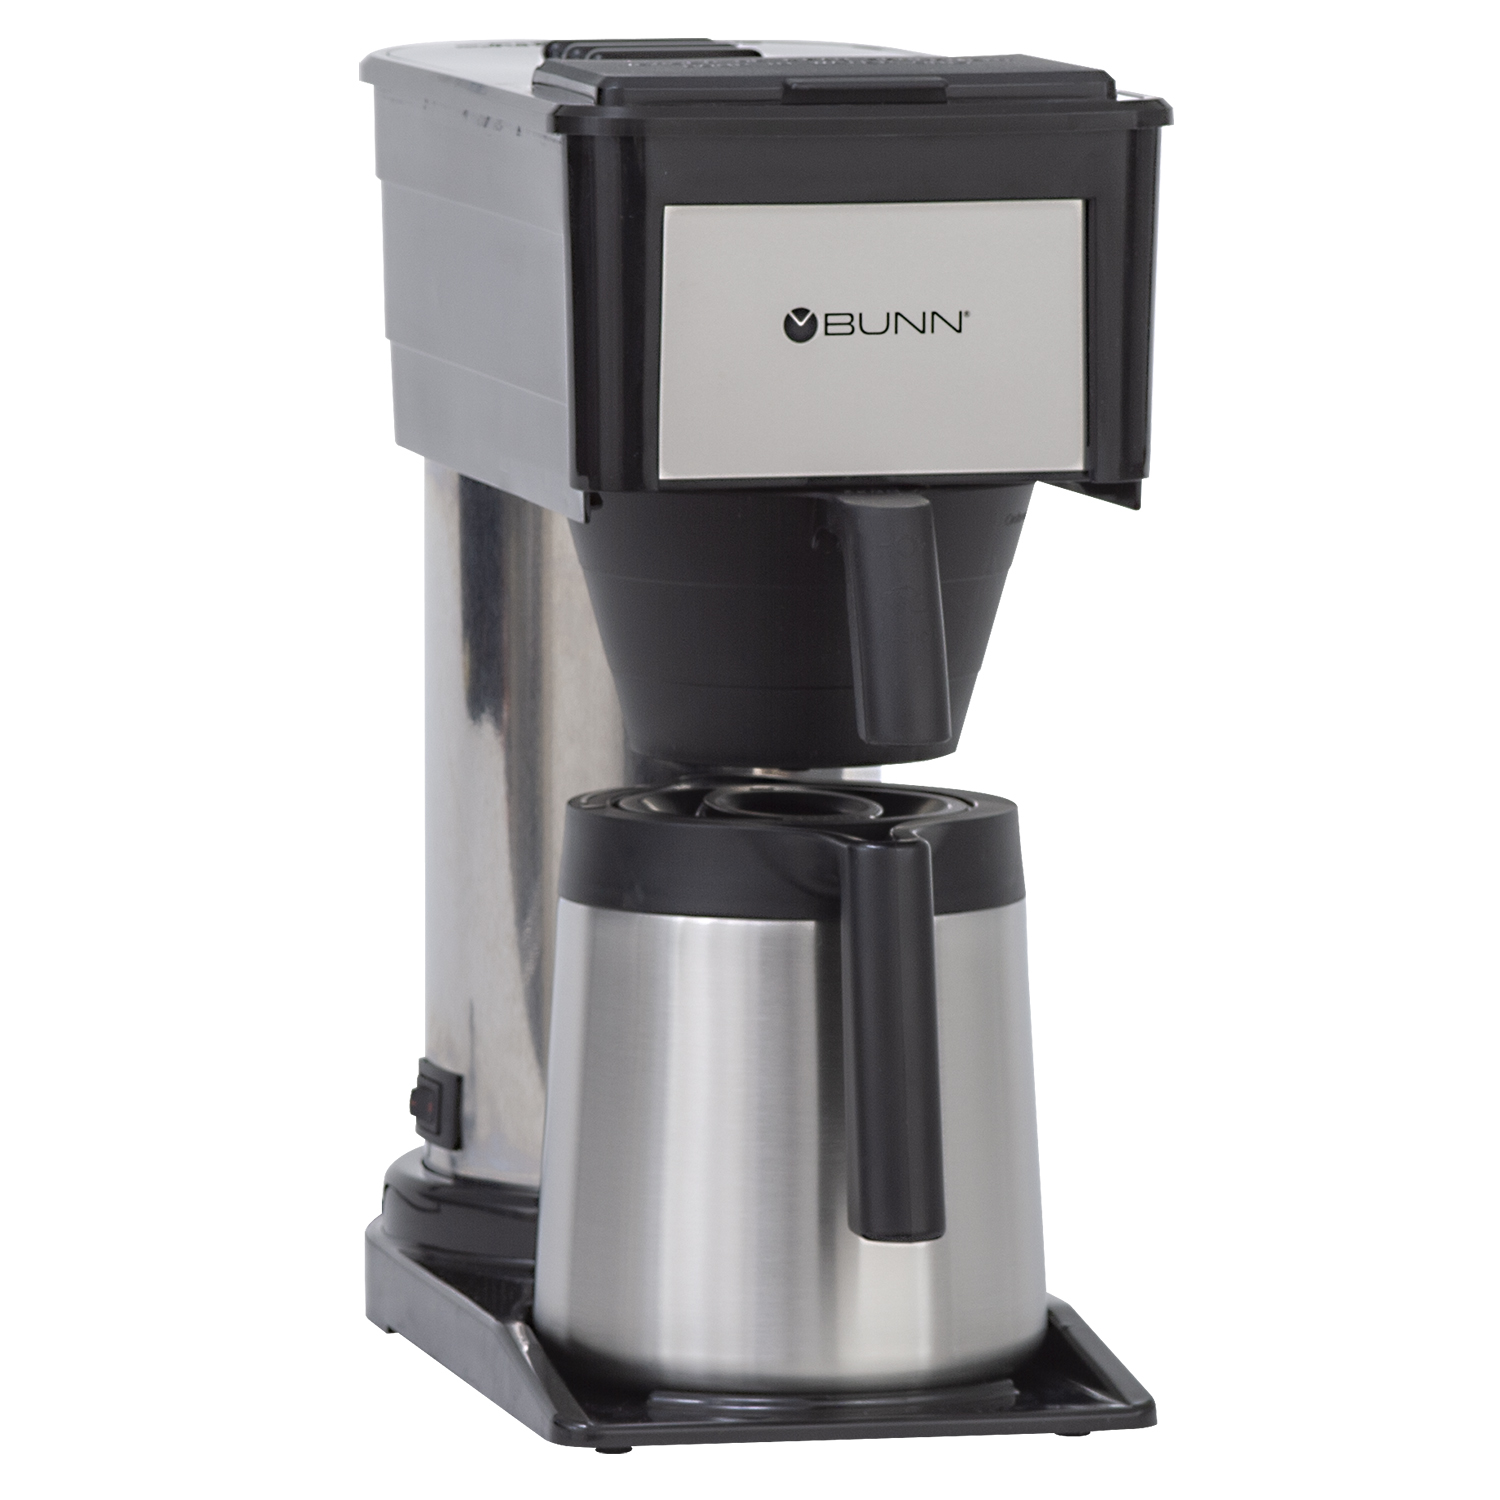 BUNN, BTX 10 Cup Black Thermal Coffee Maker (Condition: New) - image 5 of 5